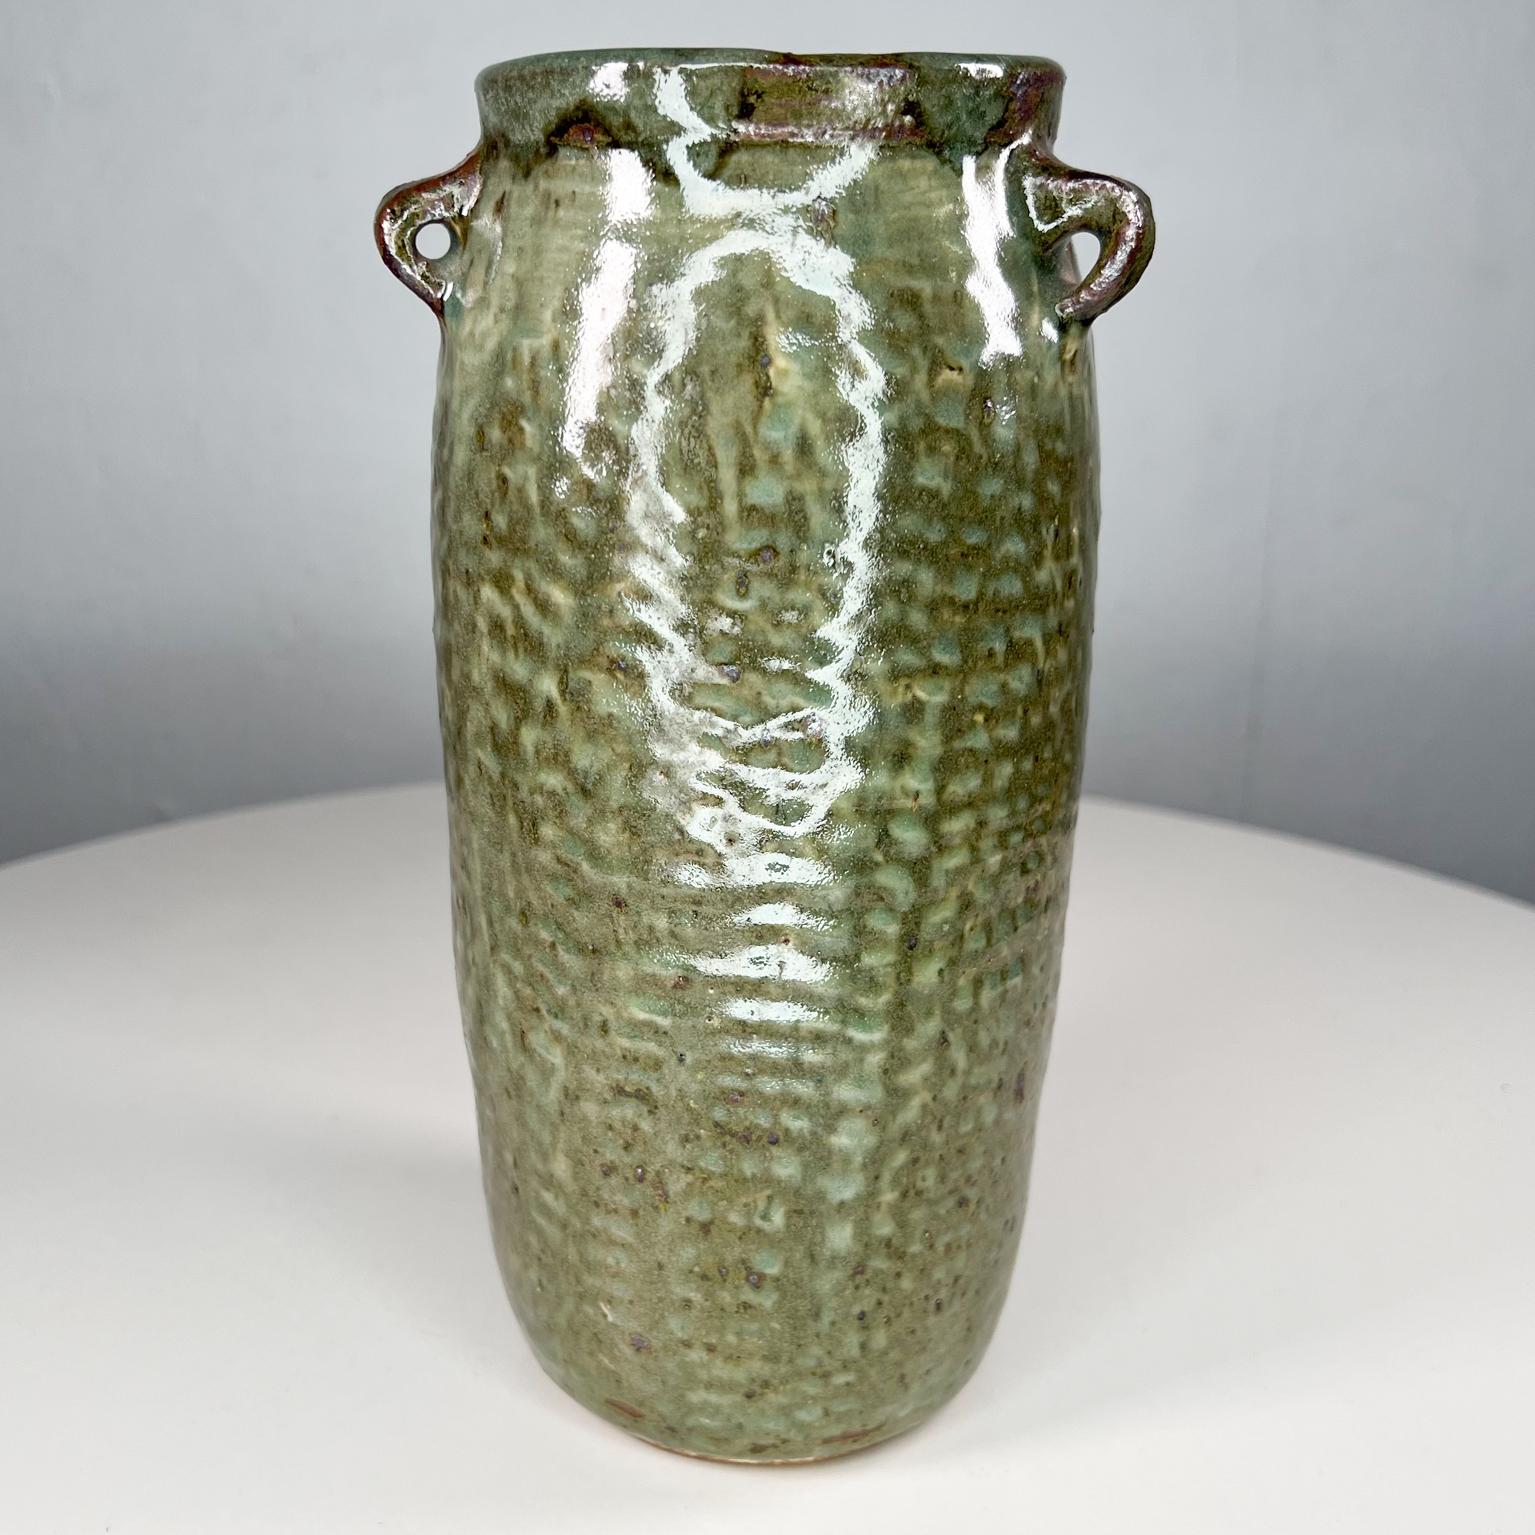 Vivika & Otto Heino studio pottery Vase from Ojai Calif
Maker stamped
A wonderfully executed and designed earthenware vase by ceramics masters husband and wife artists, Vivika and Otto Heino.
Measures: 8.88 tall x 4.5 diameter
Preowned original